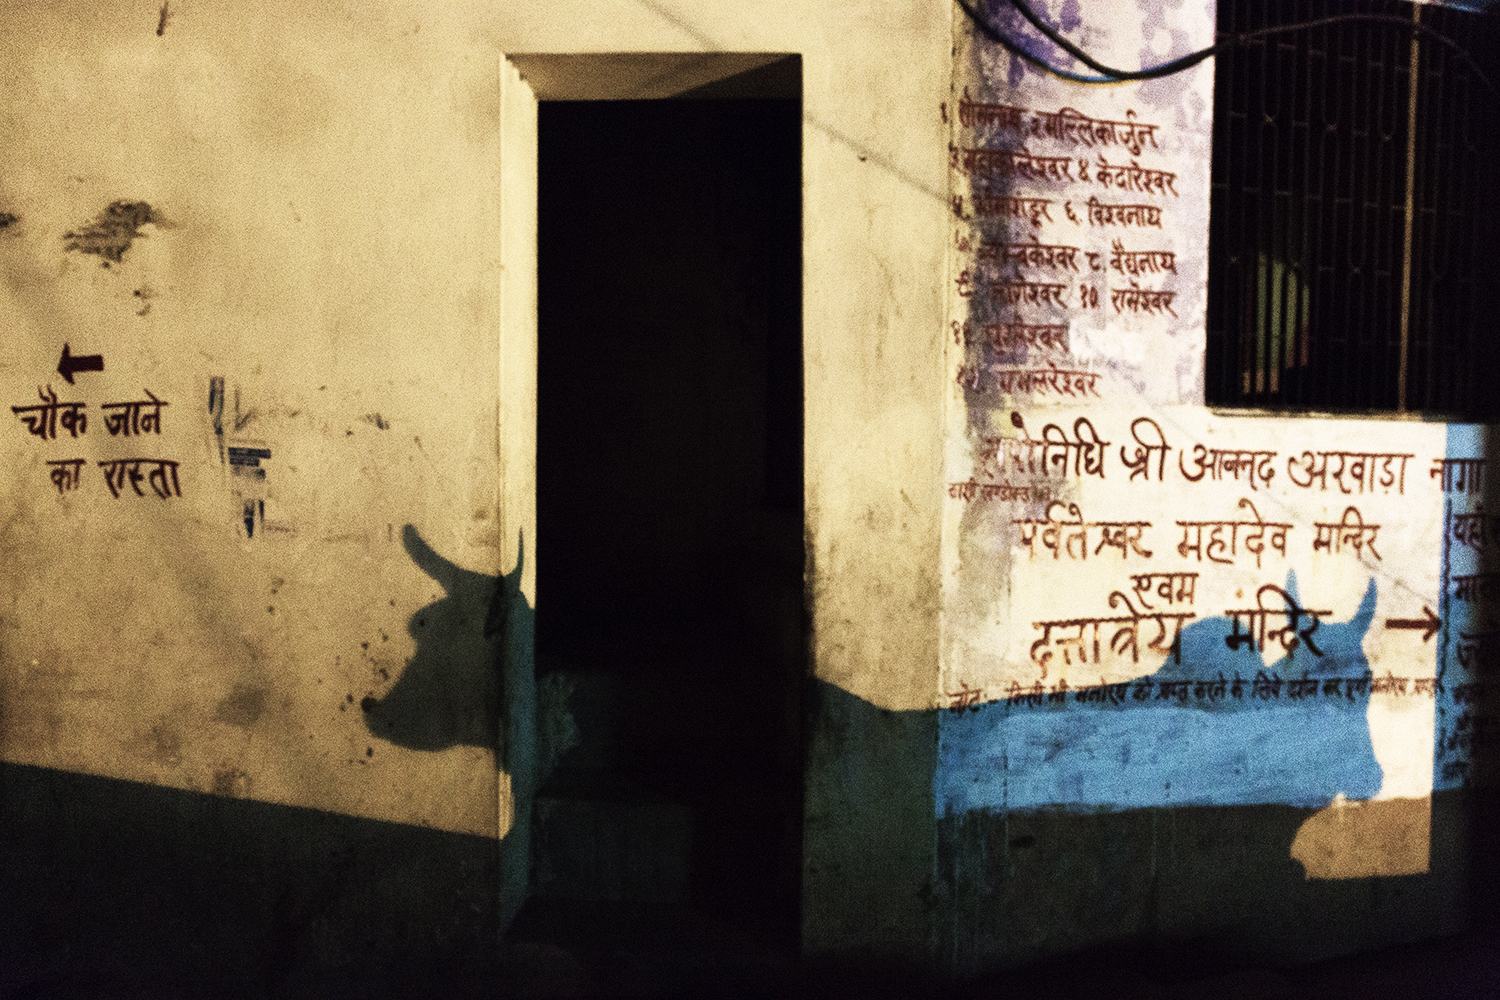  Shadows of cows, two of many that populate the Varanasi streets and Ghats, on the way to the women’s ashram. 